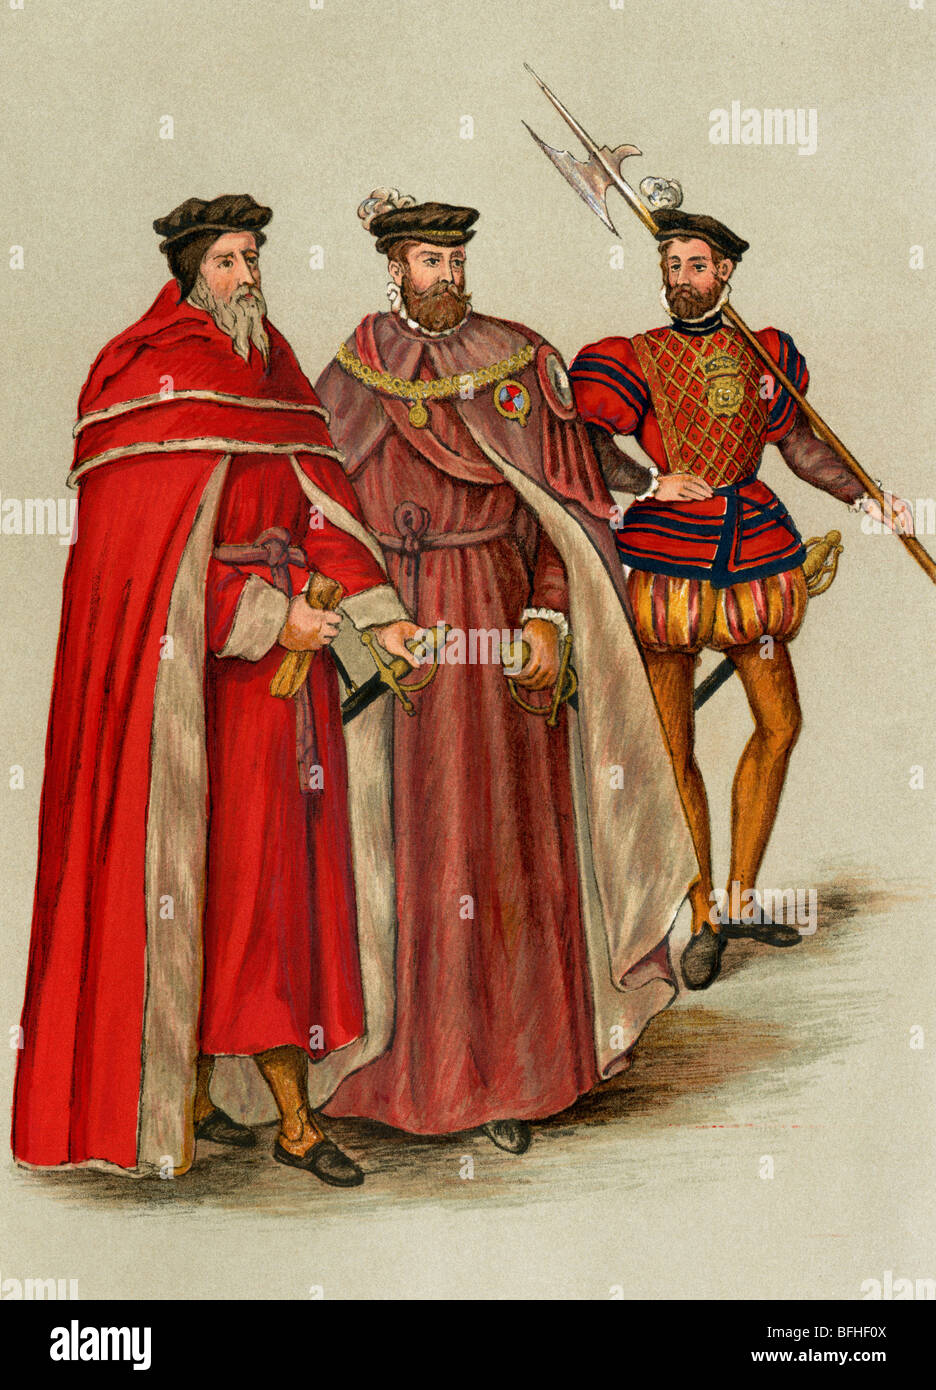 Two Peers, in their robes, and a halberdier during Elizabeth's reign, 1500s. Color lithograph Stock Photo